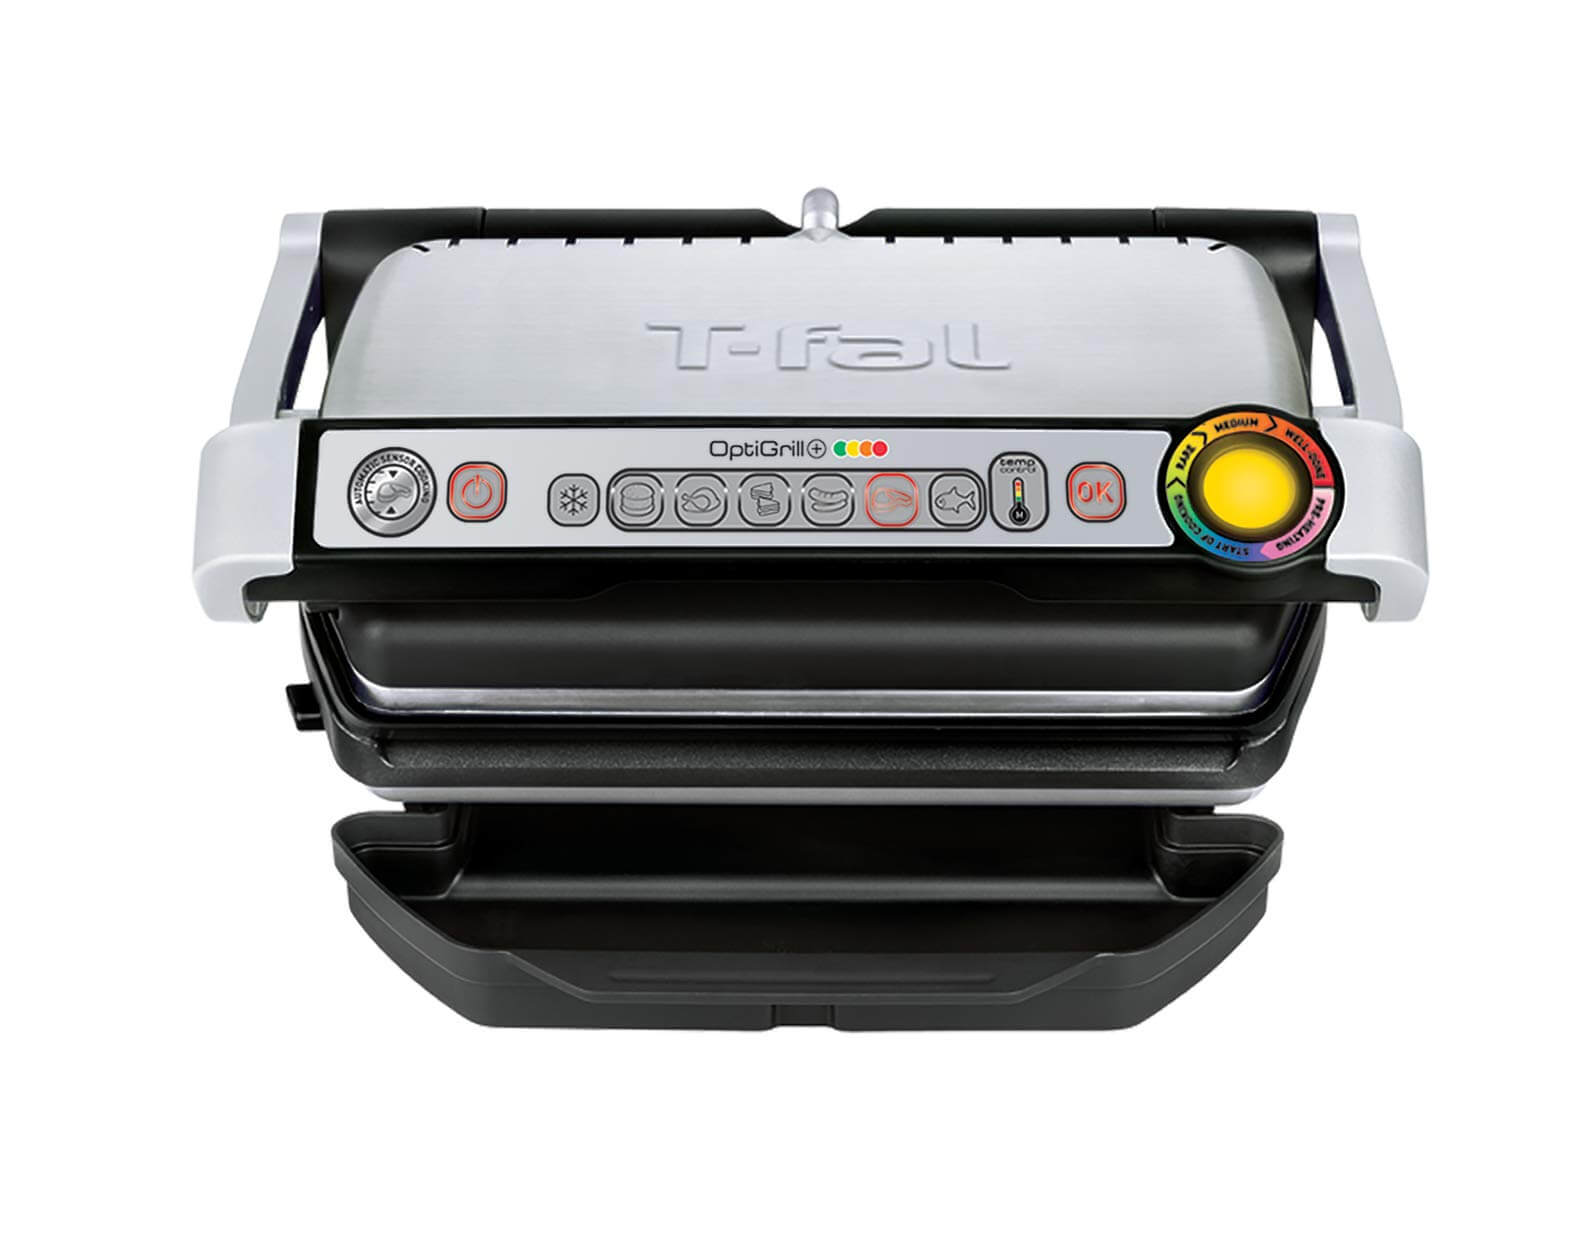 T-fal GC70 OptiGrill Electric Grill, indoor grill best, indoor grill pan, indoor grill smokeless, best smokeless indoor grill